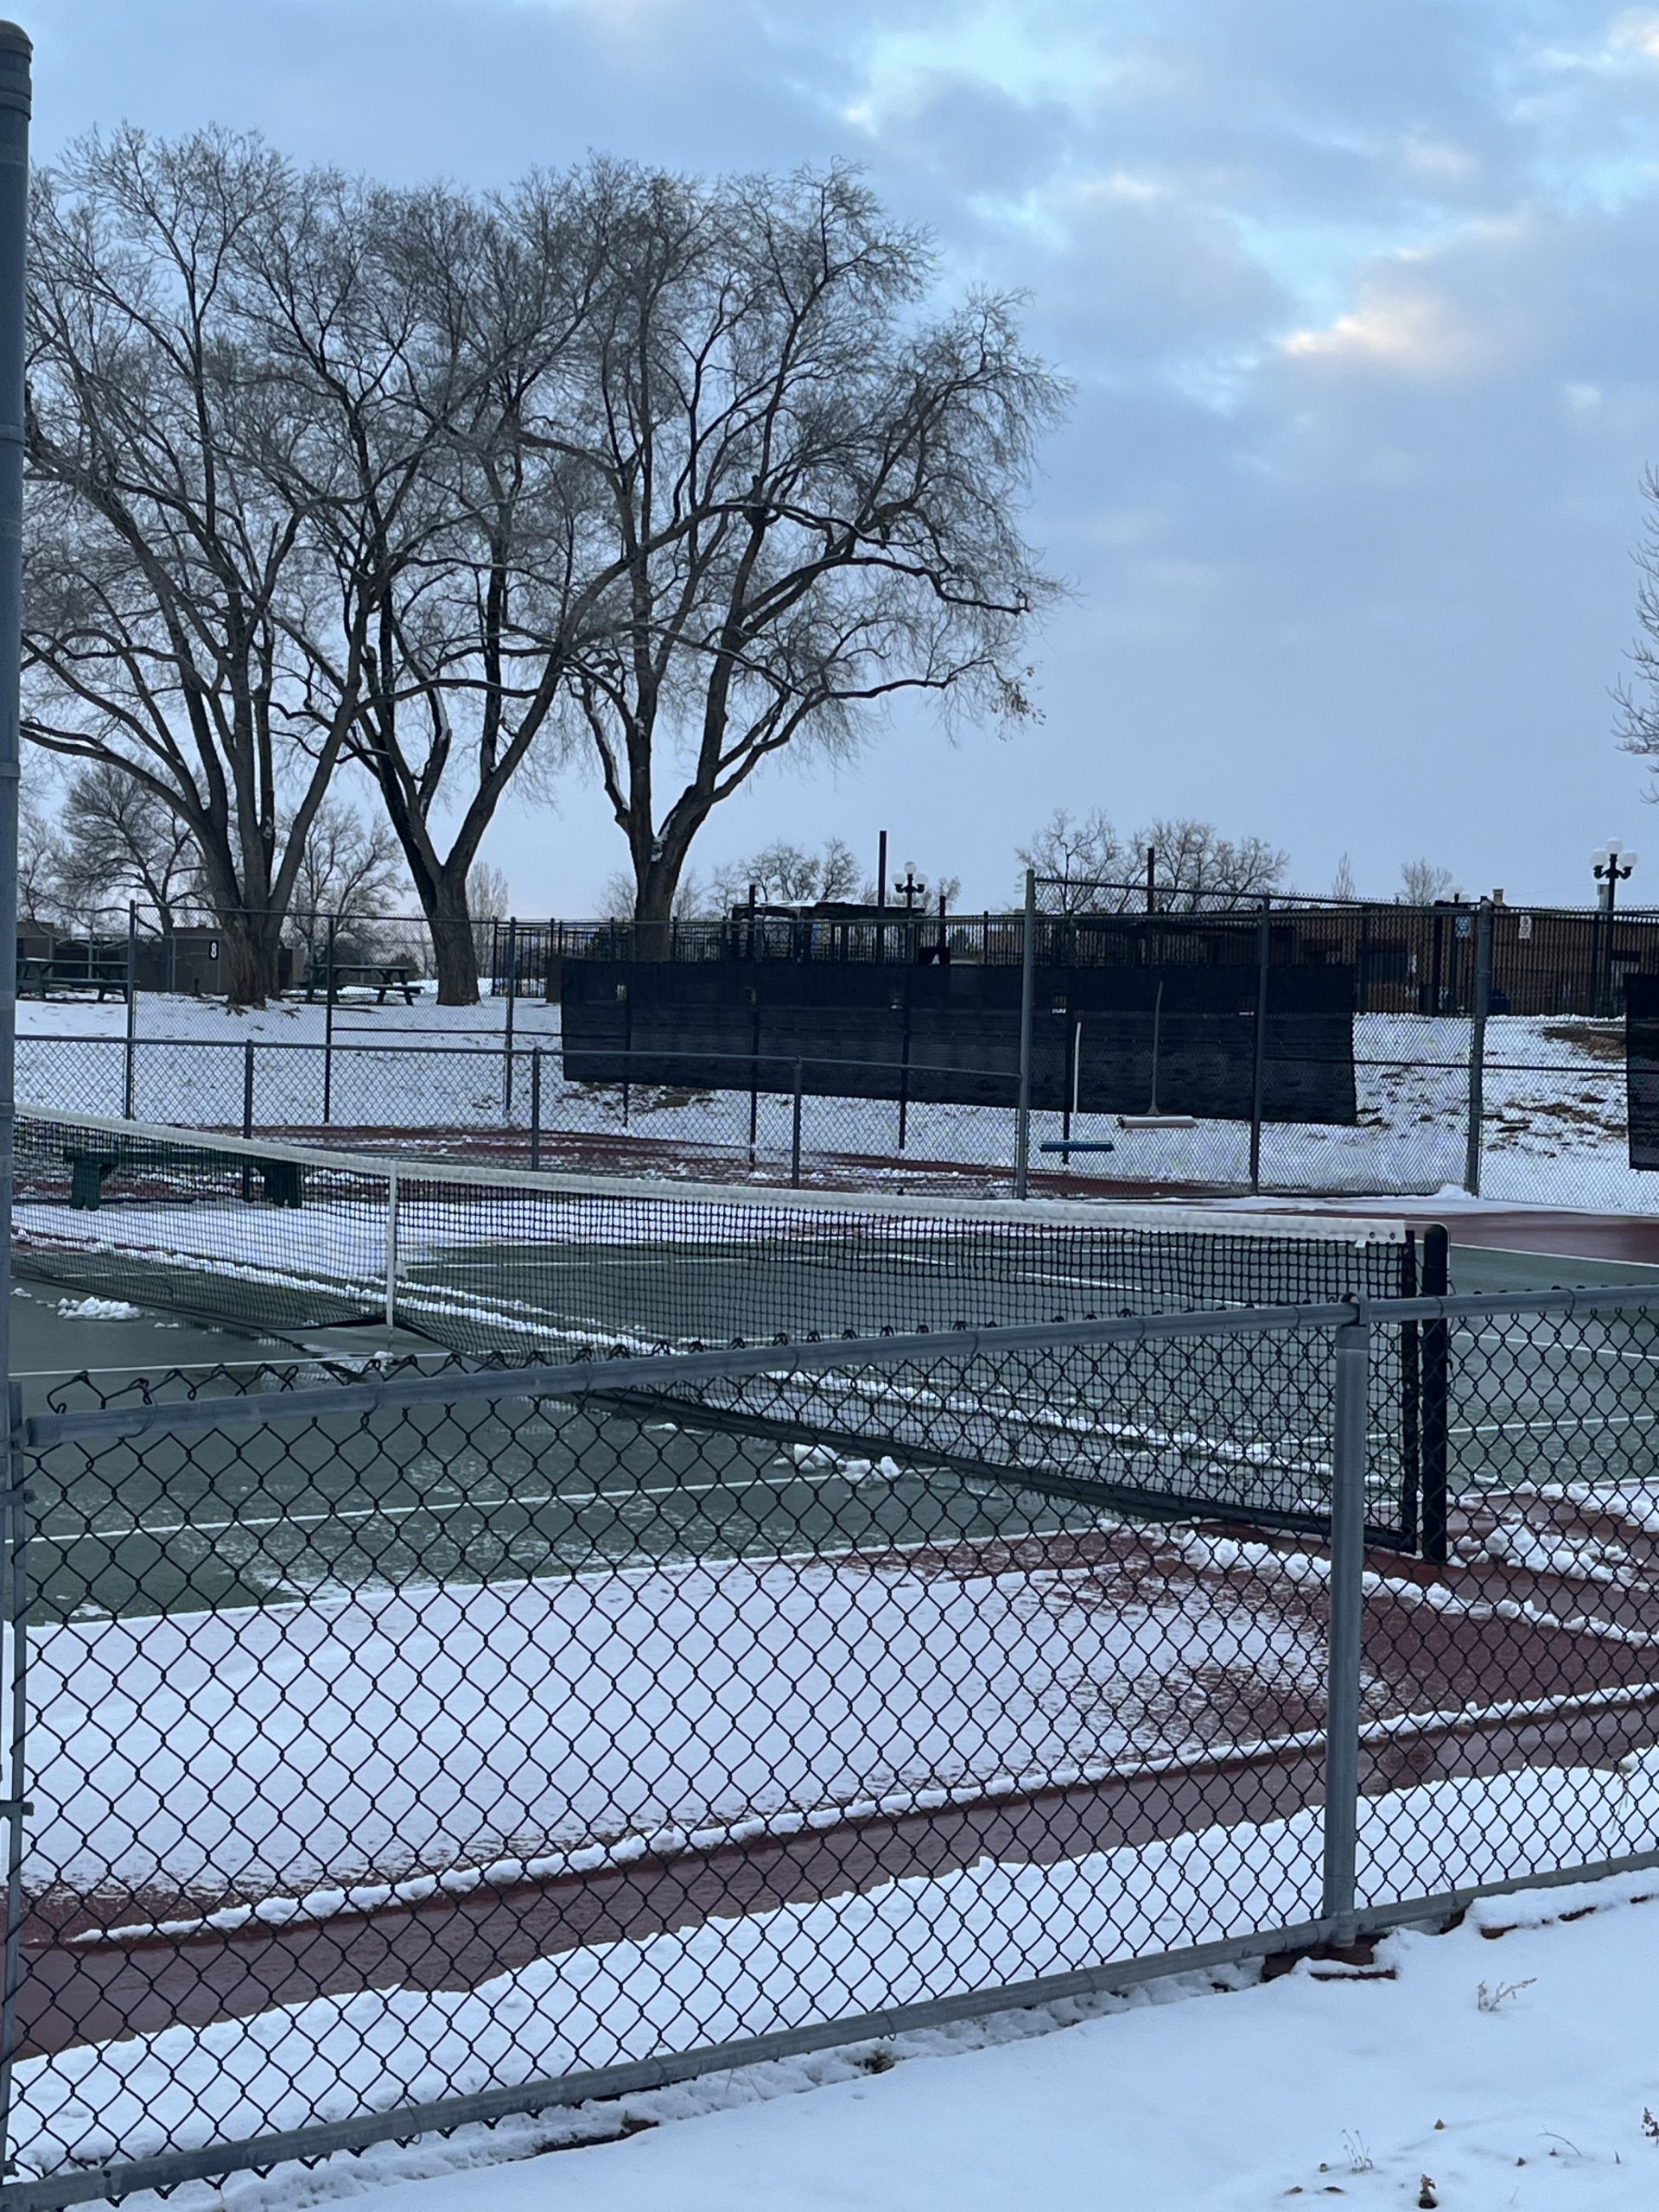 Snow on courts